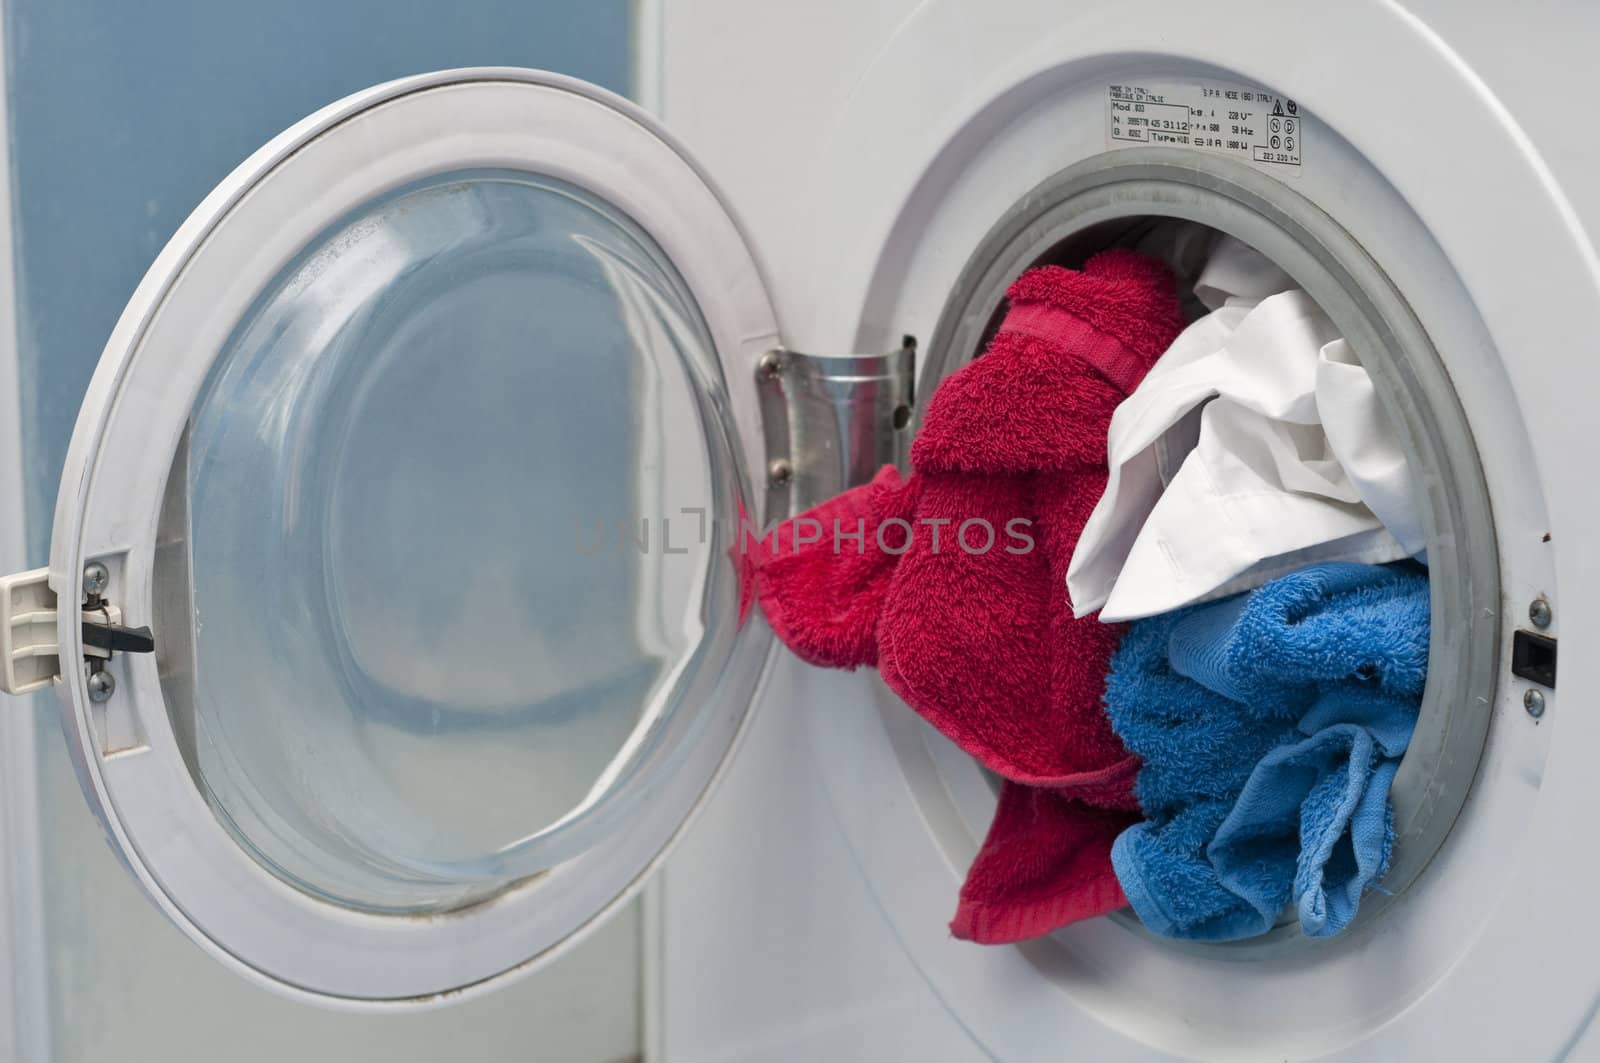 Open Washing machine with white, red and blue cloths